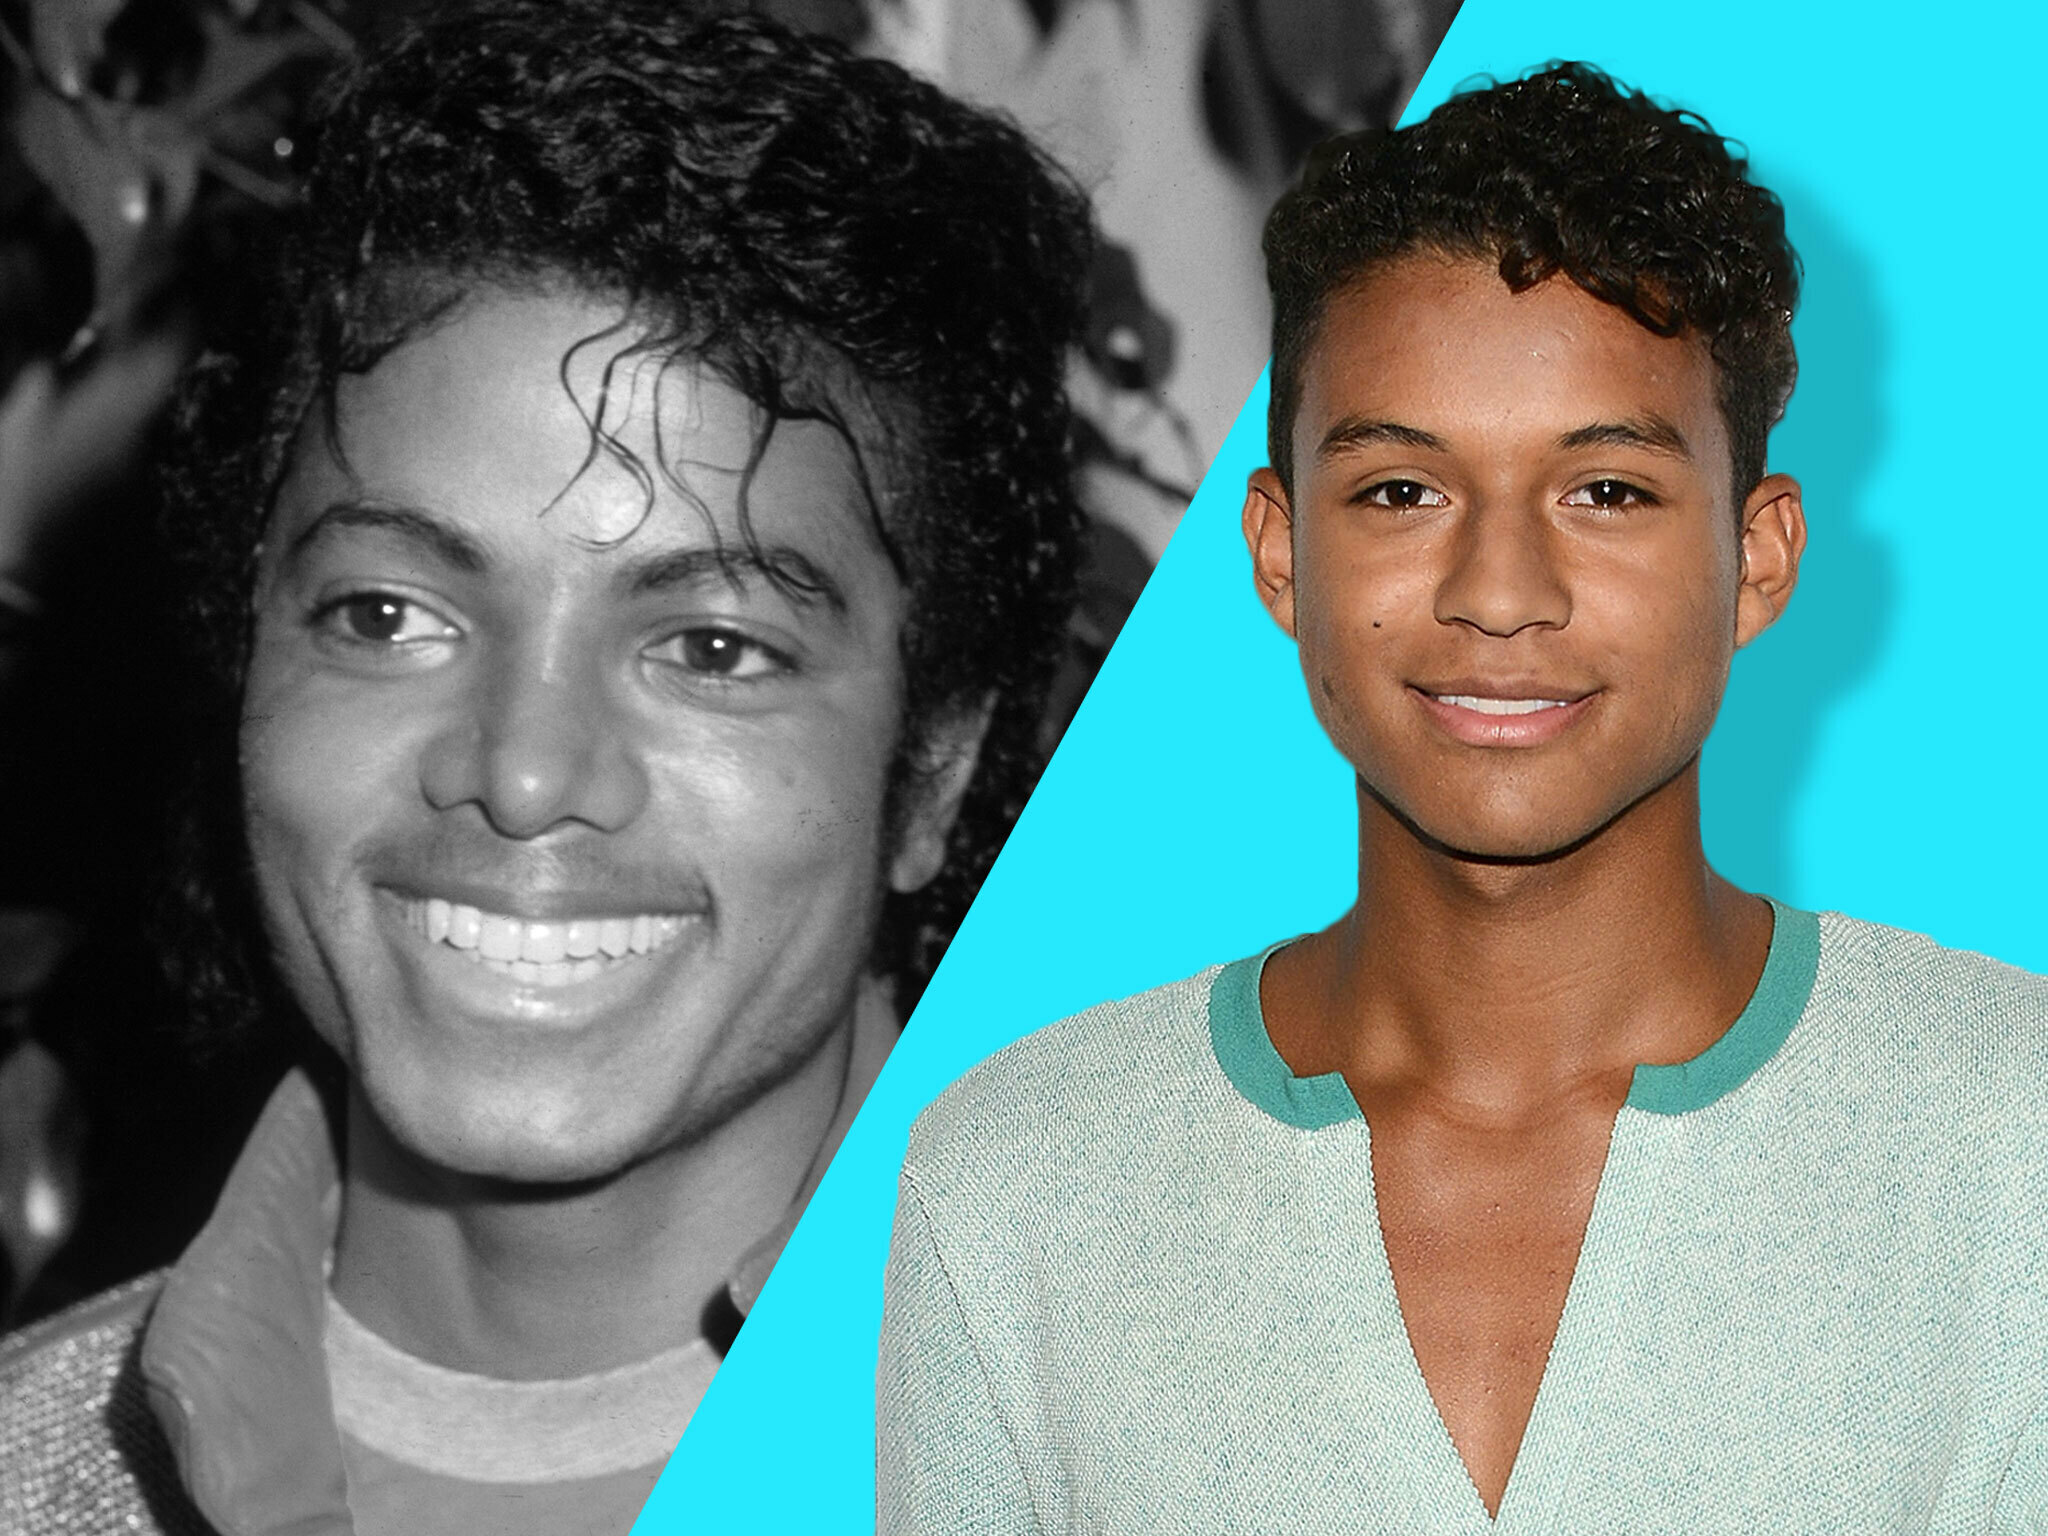 Michael Jackson Biopic: Cast, Title & Everything We Know So Far